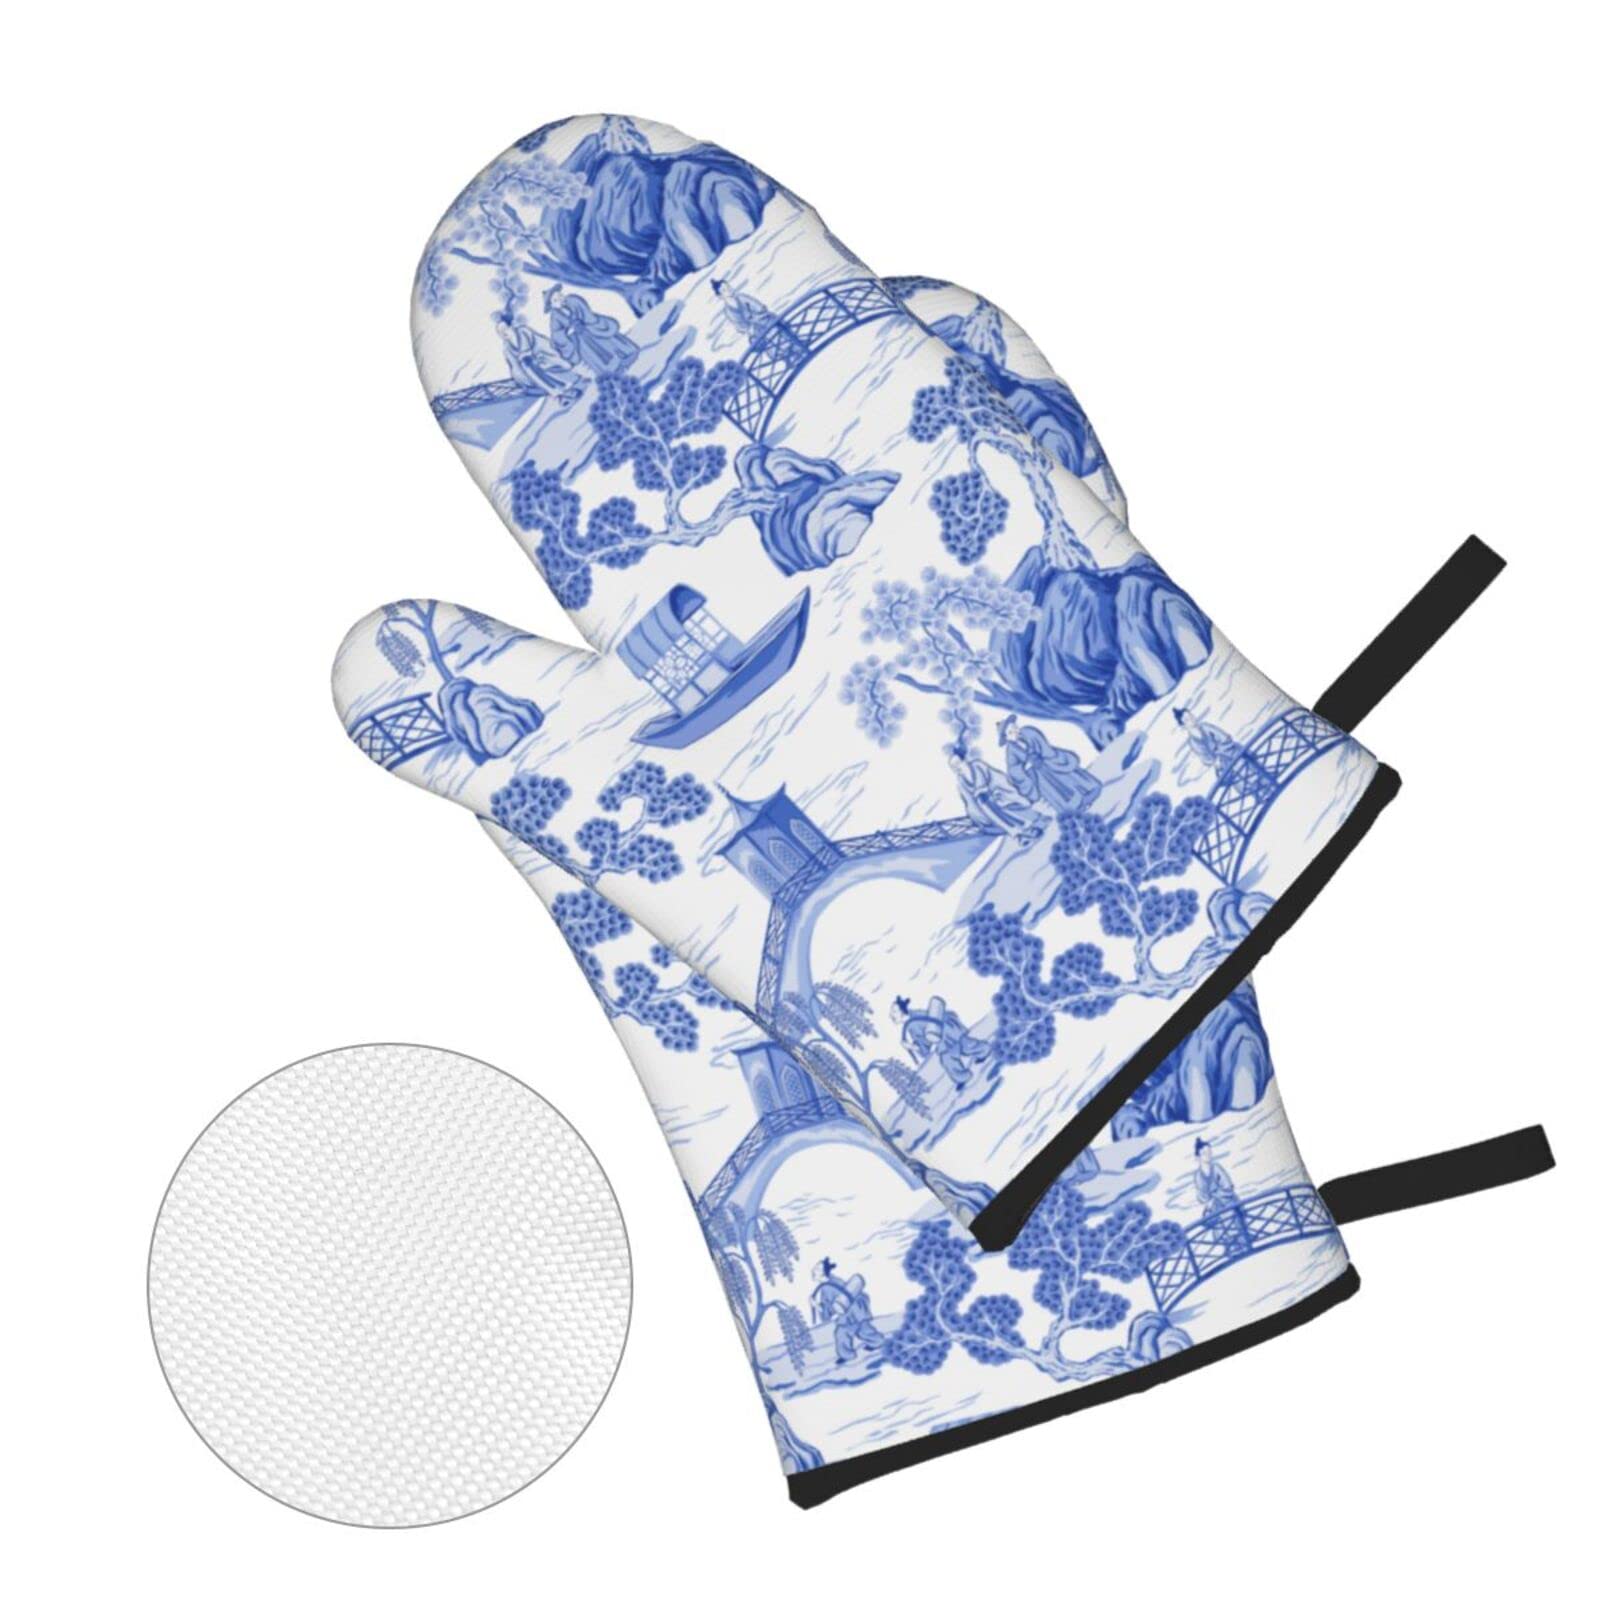 Blue Chinoiserie Pagoda White Oven Mitts and Pot Holders Set of 4, Oven Mittens and Potholders Heat Resistant Gloves for Kitchen Cooking Baking Grilling BBQ